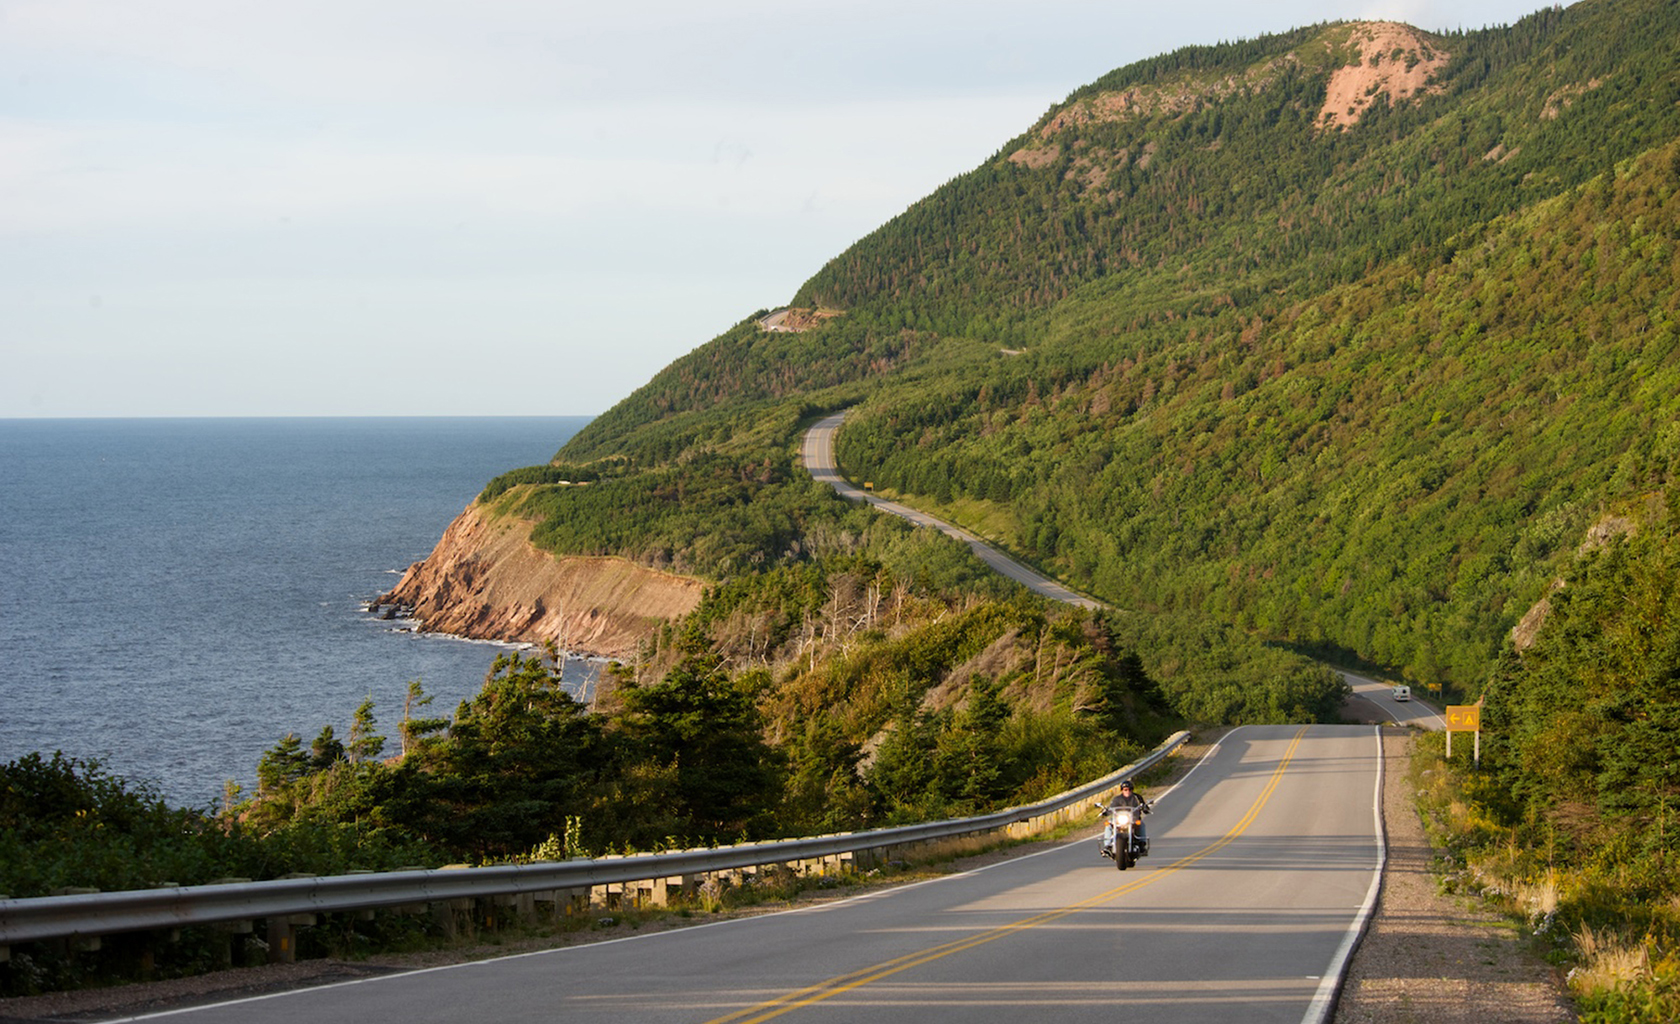 Cabot Trail in Cape Breton Highlands National Park, Canada